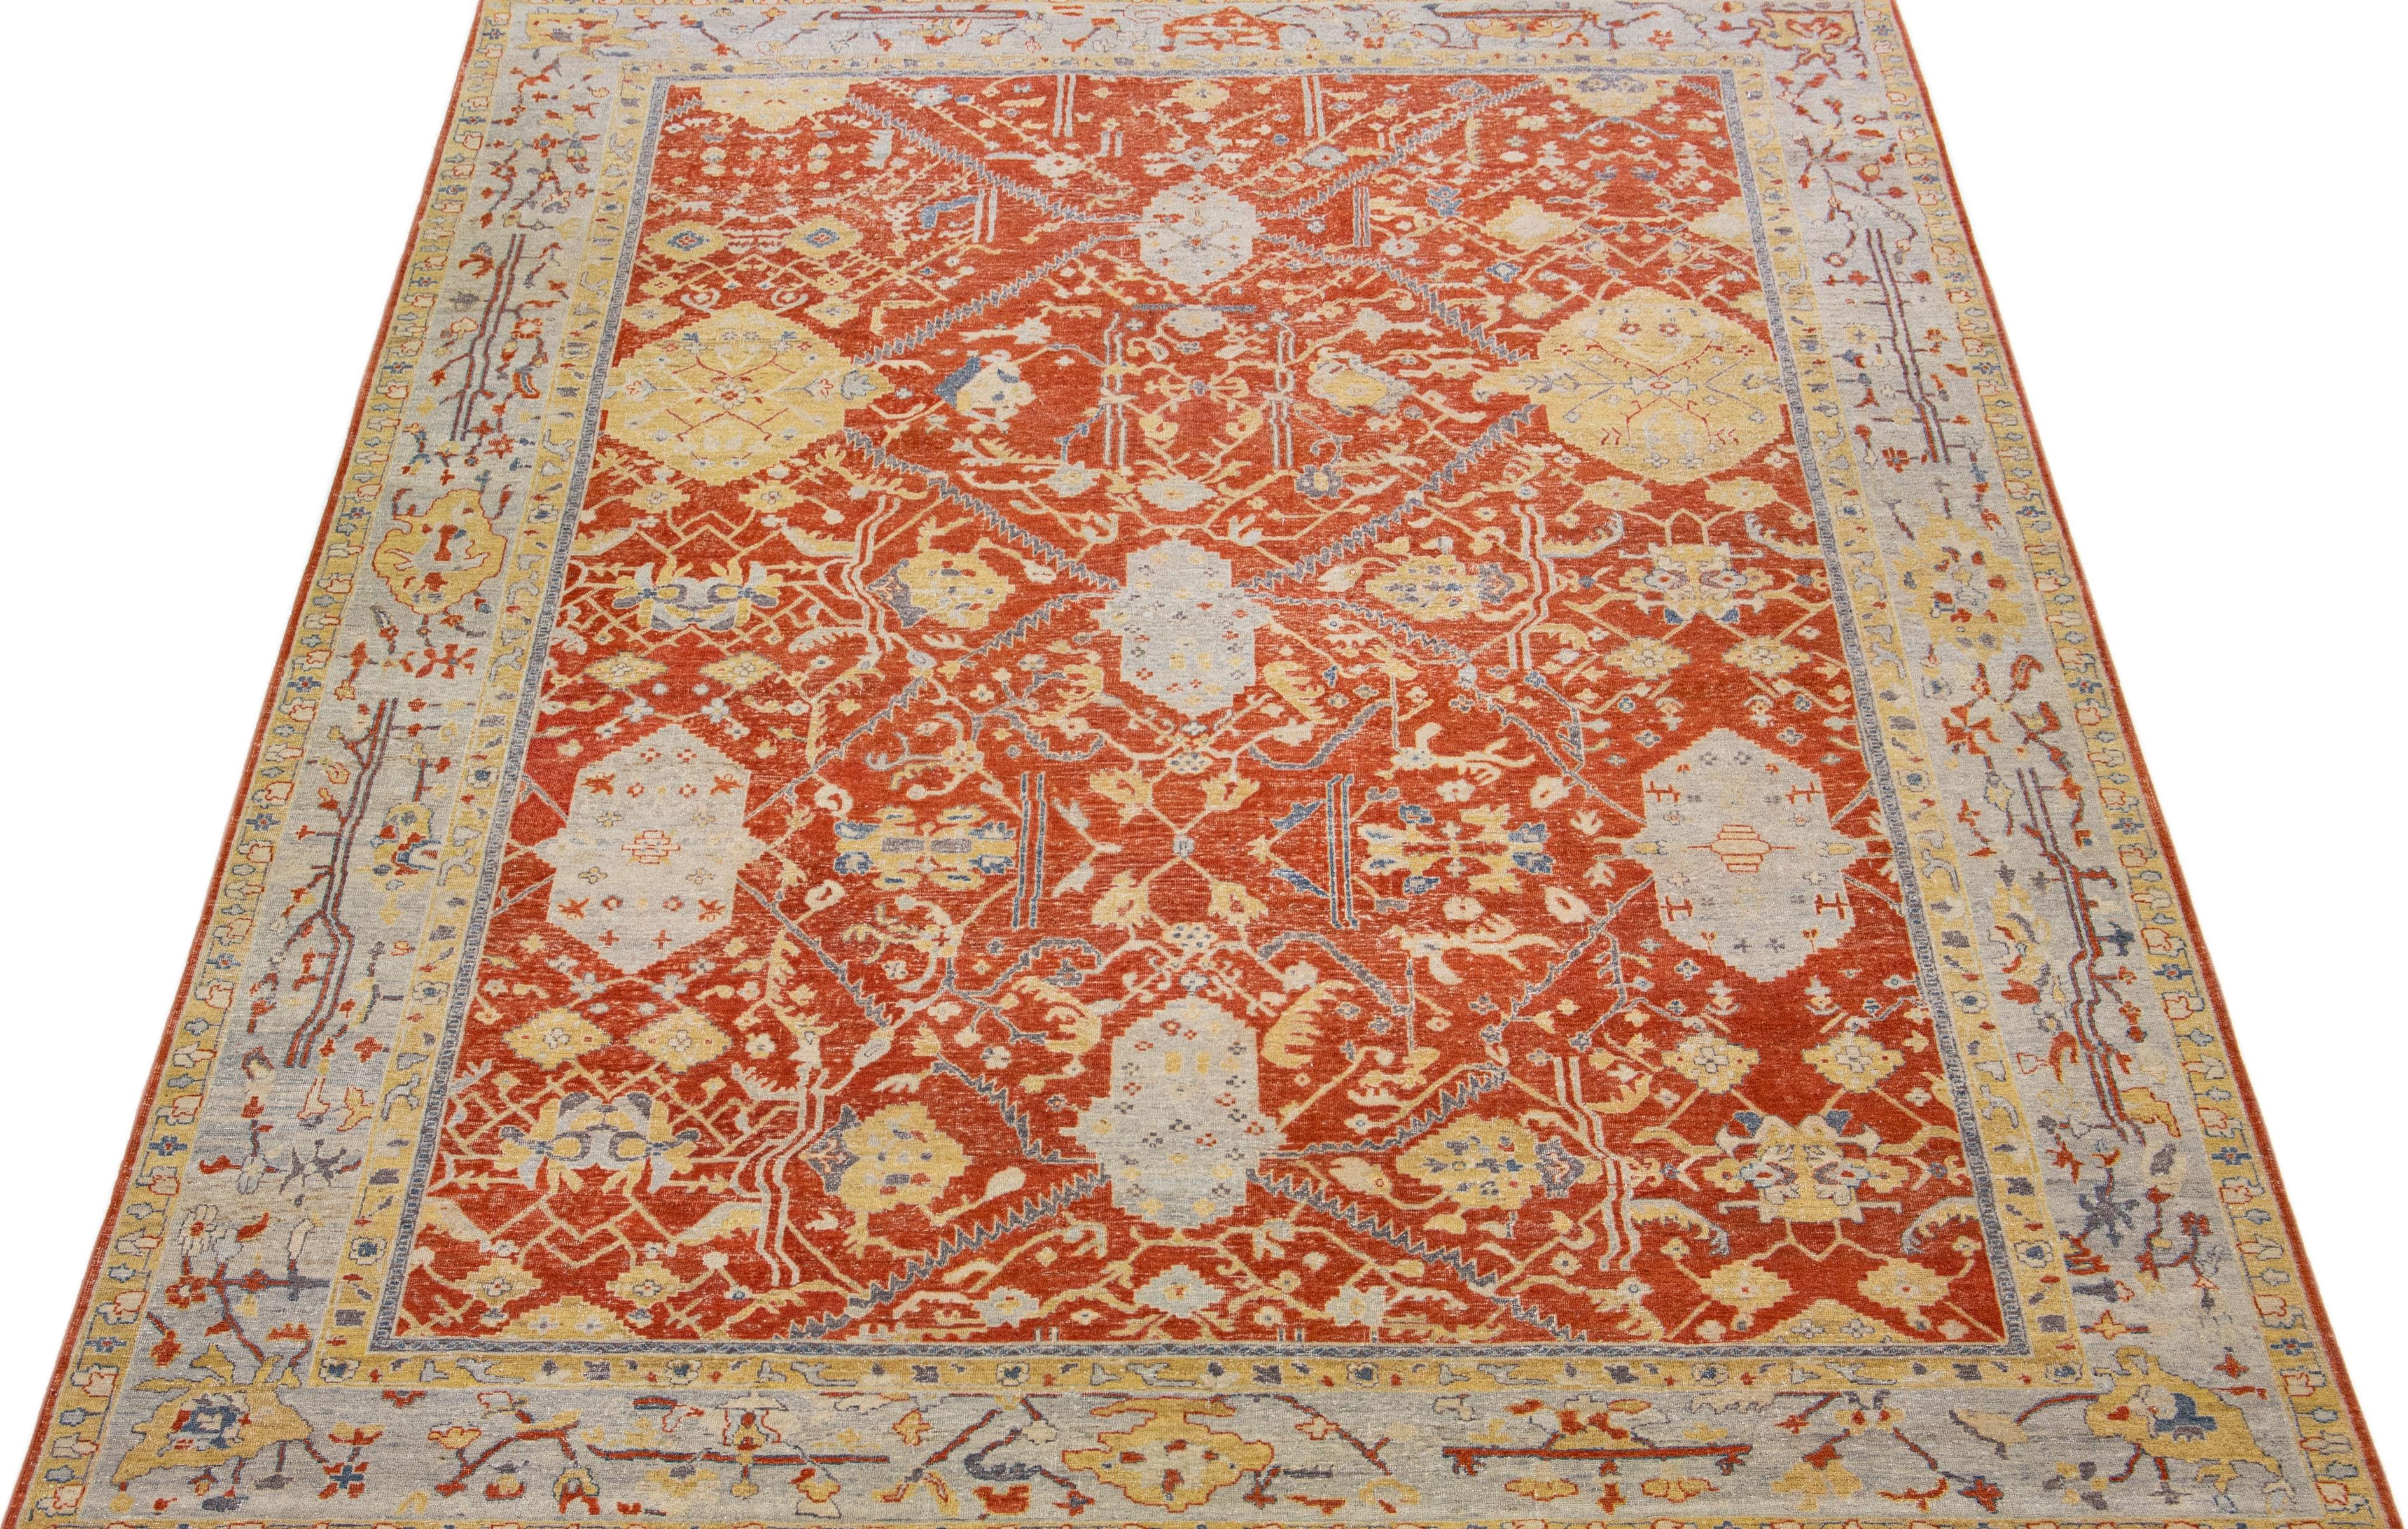 Apadana's Artisan line is an antique rug reimaging with an elegant way to inject a striking antique aesthetic into a space. This line of rugs is decidedly unique and reimagines what an antique rug look can be. Every single piece from our Artisan